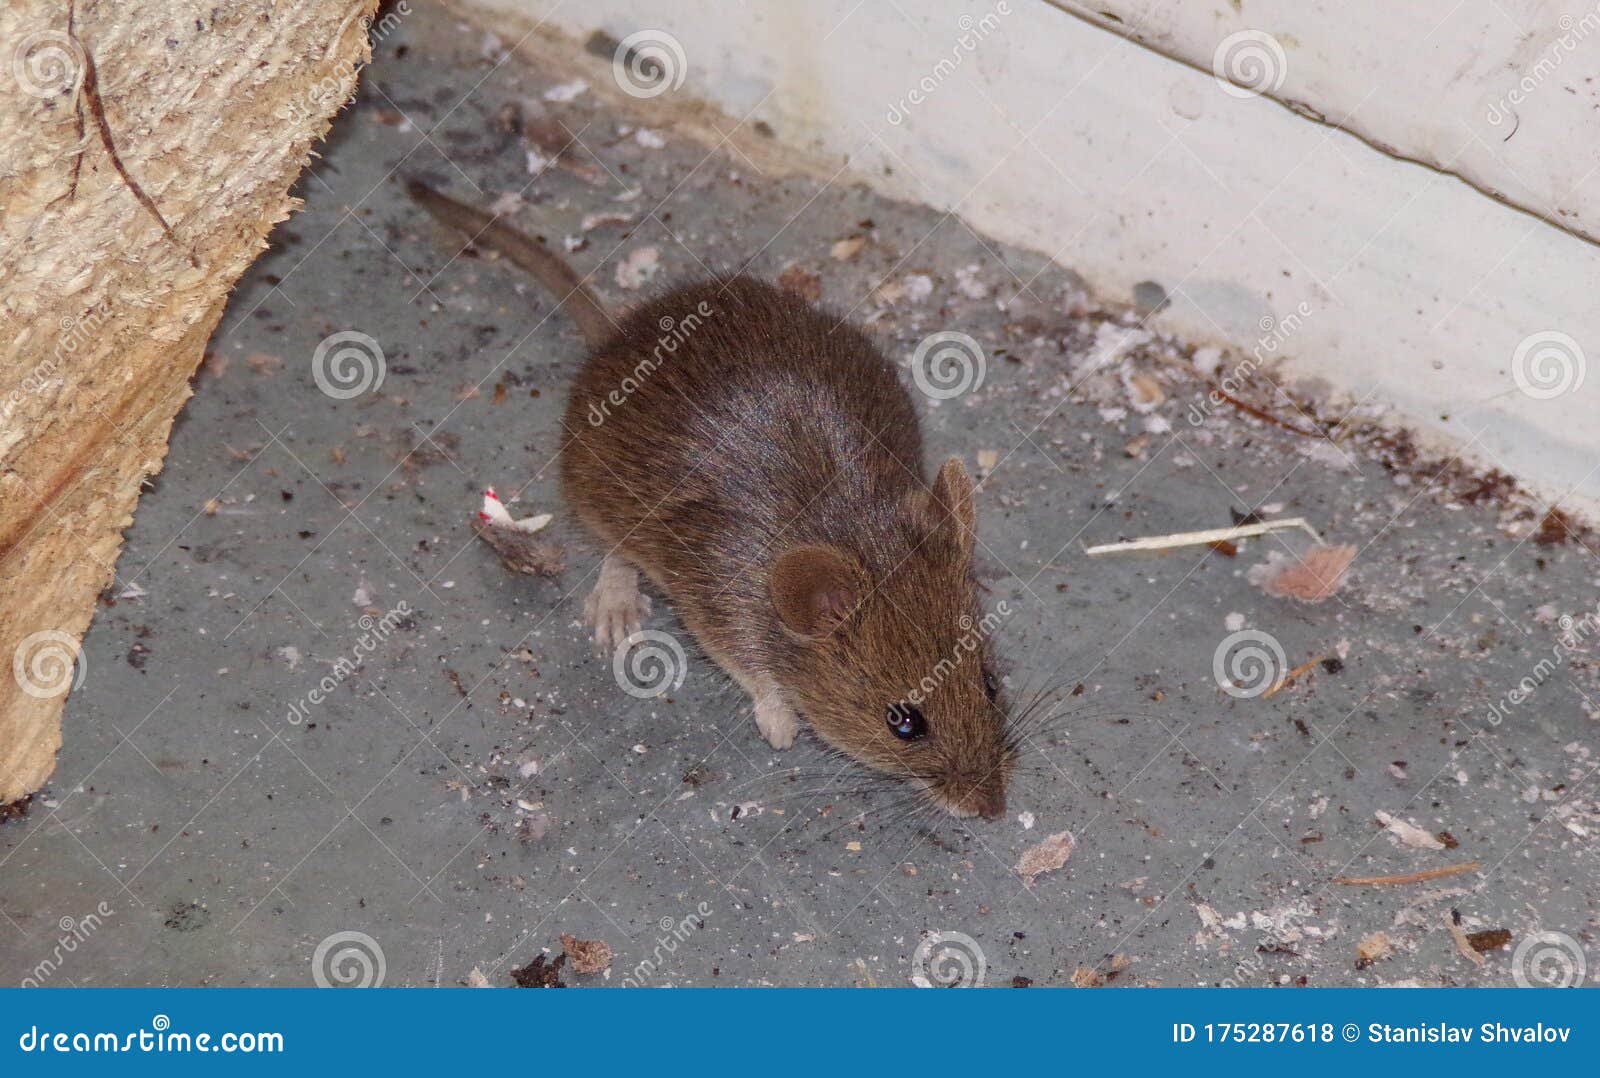 mouse. the mouse is a pest in the house. mouse nibbles close-up. concept of home rodent pests .